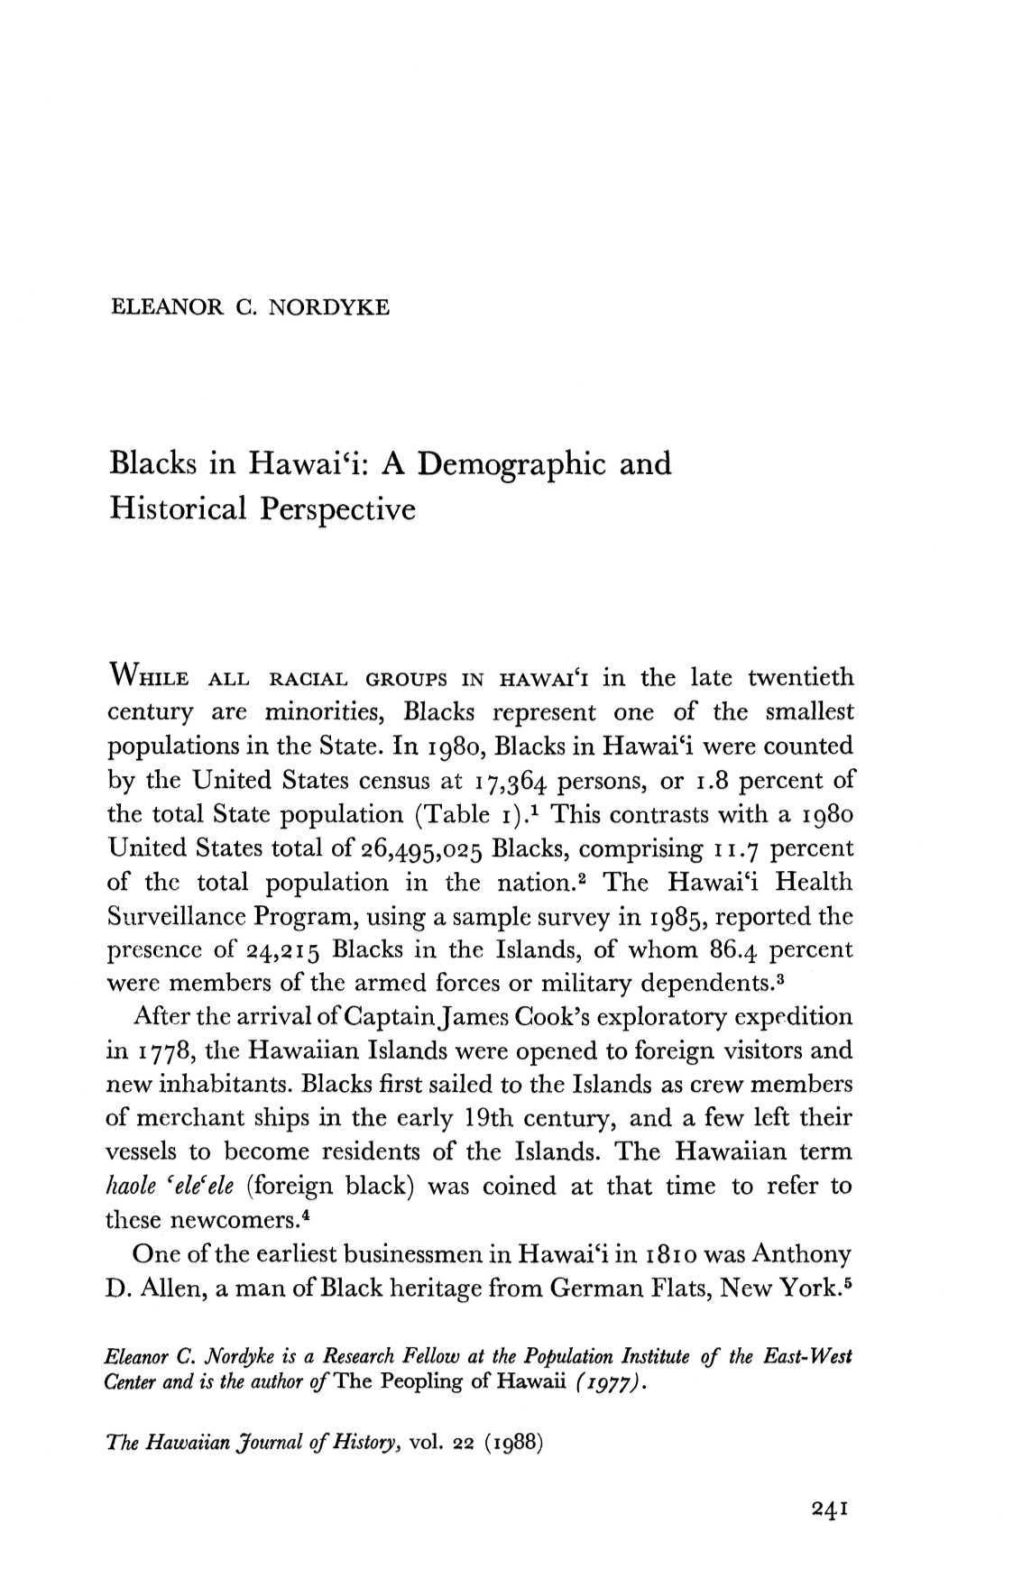 Blacks in Hawai'i: a Demographic and Historical Perspective